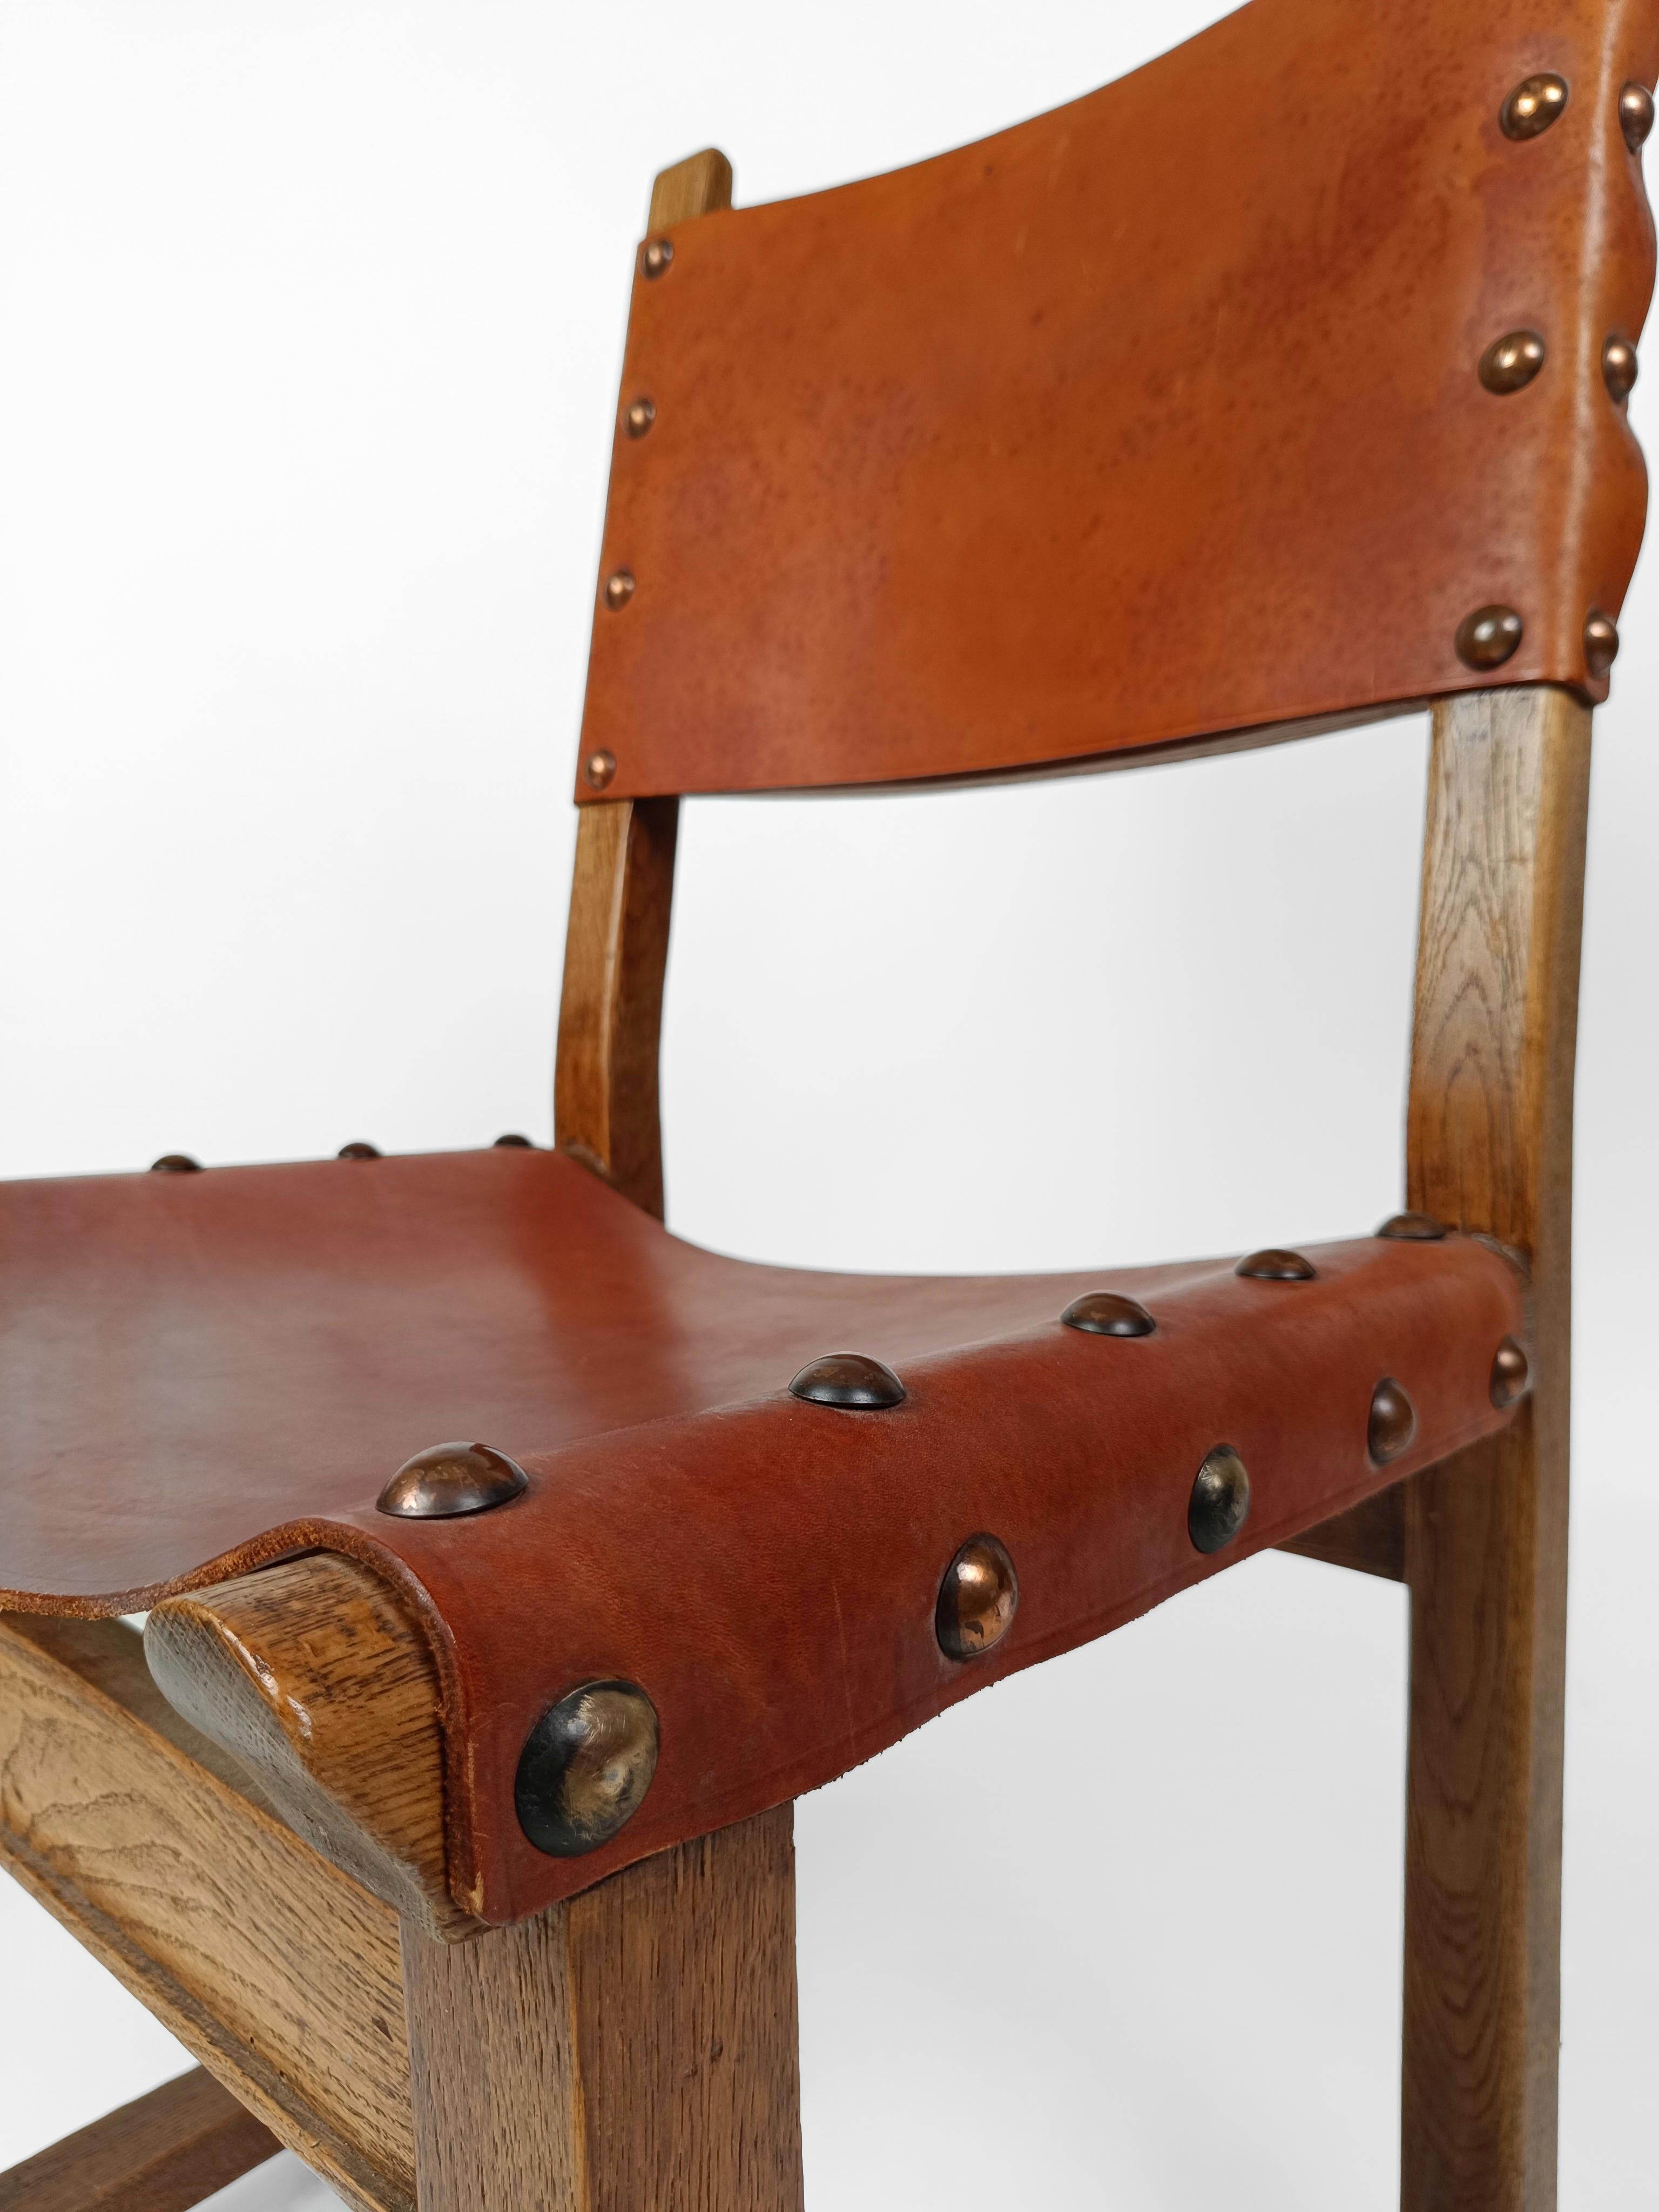 Set composed of six chairs in solid carved oak and studded cognac leather probably produced at the beginning of the twentieth century in Italy but in an antique style reminiscent of Tuscan or Spanish chairs
A Folk and Rustic design with an essential